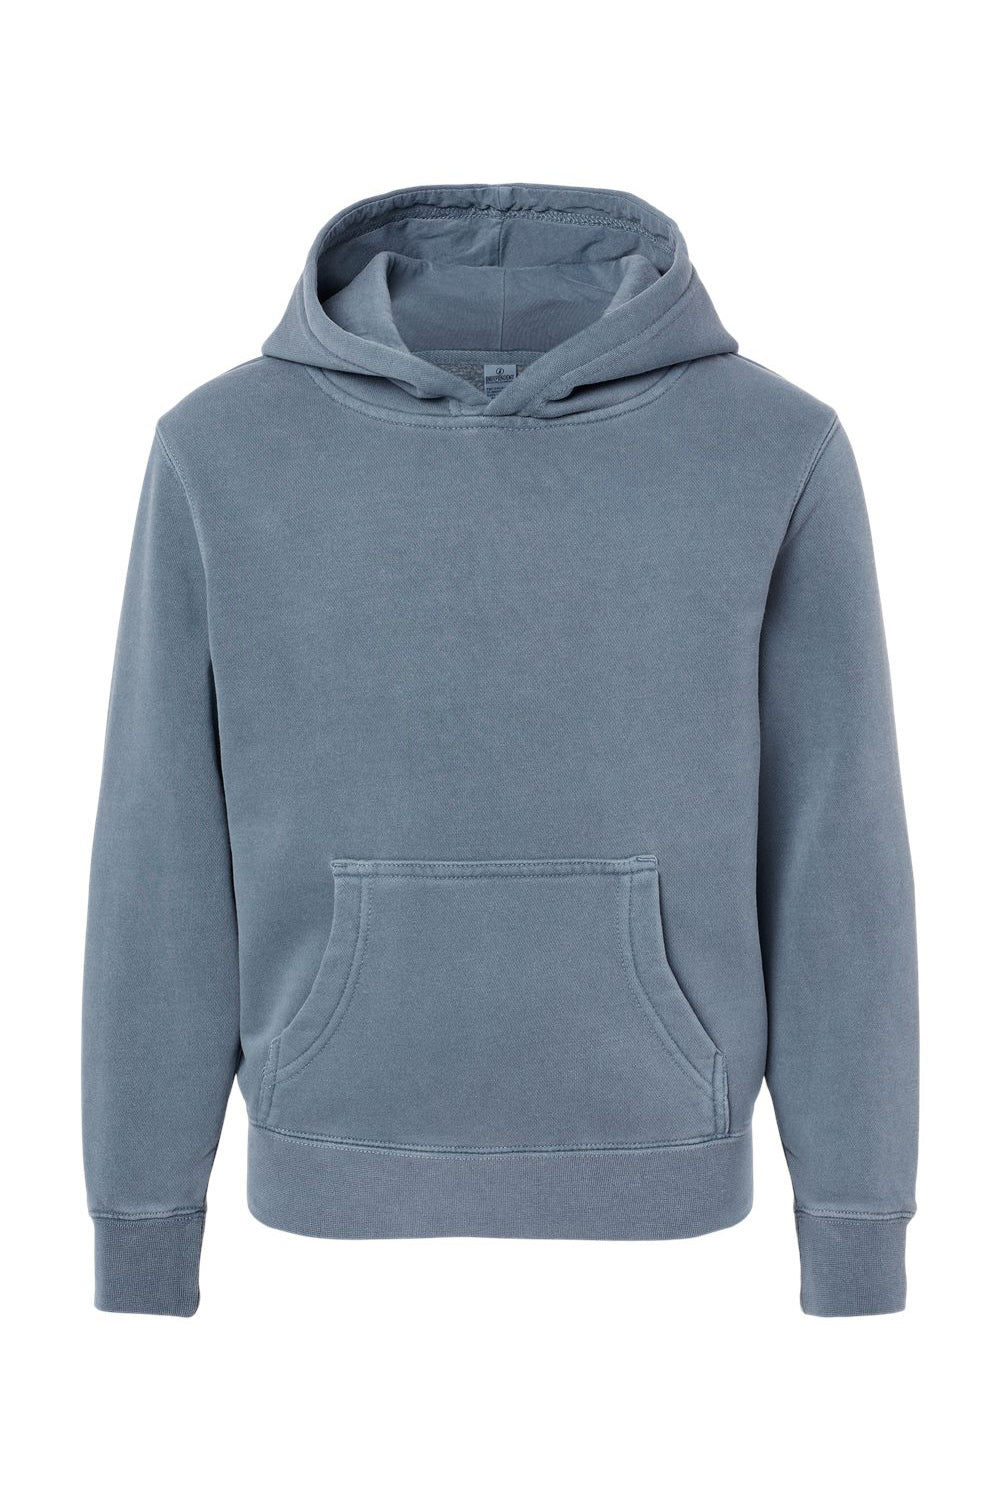 Independent Trading Co. PRM1500Y Youth Pigment Dyed Hooded Sweatshirt Hoodie Slate Blue Flat Front